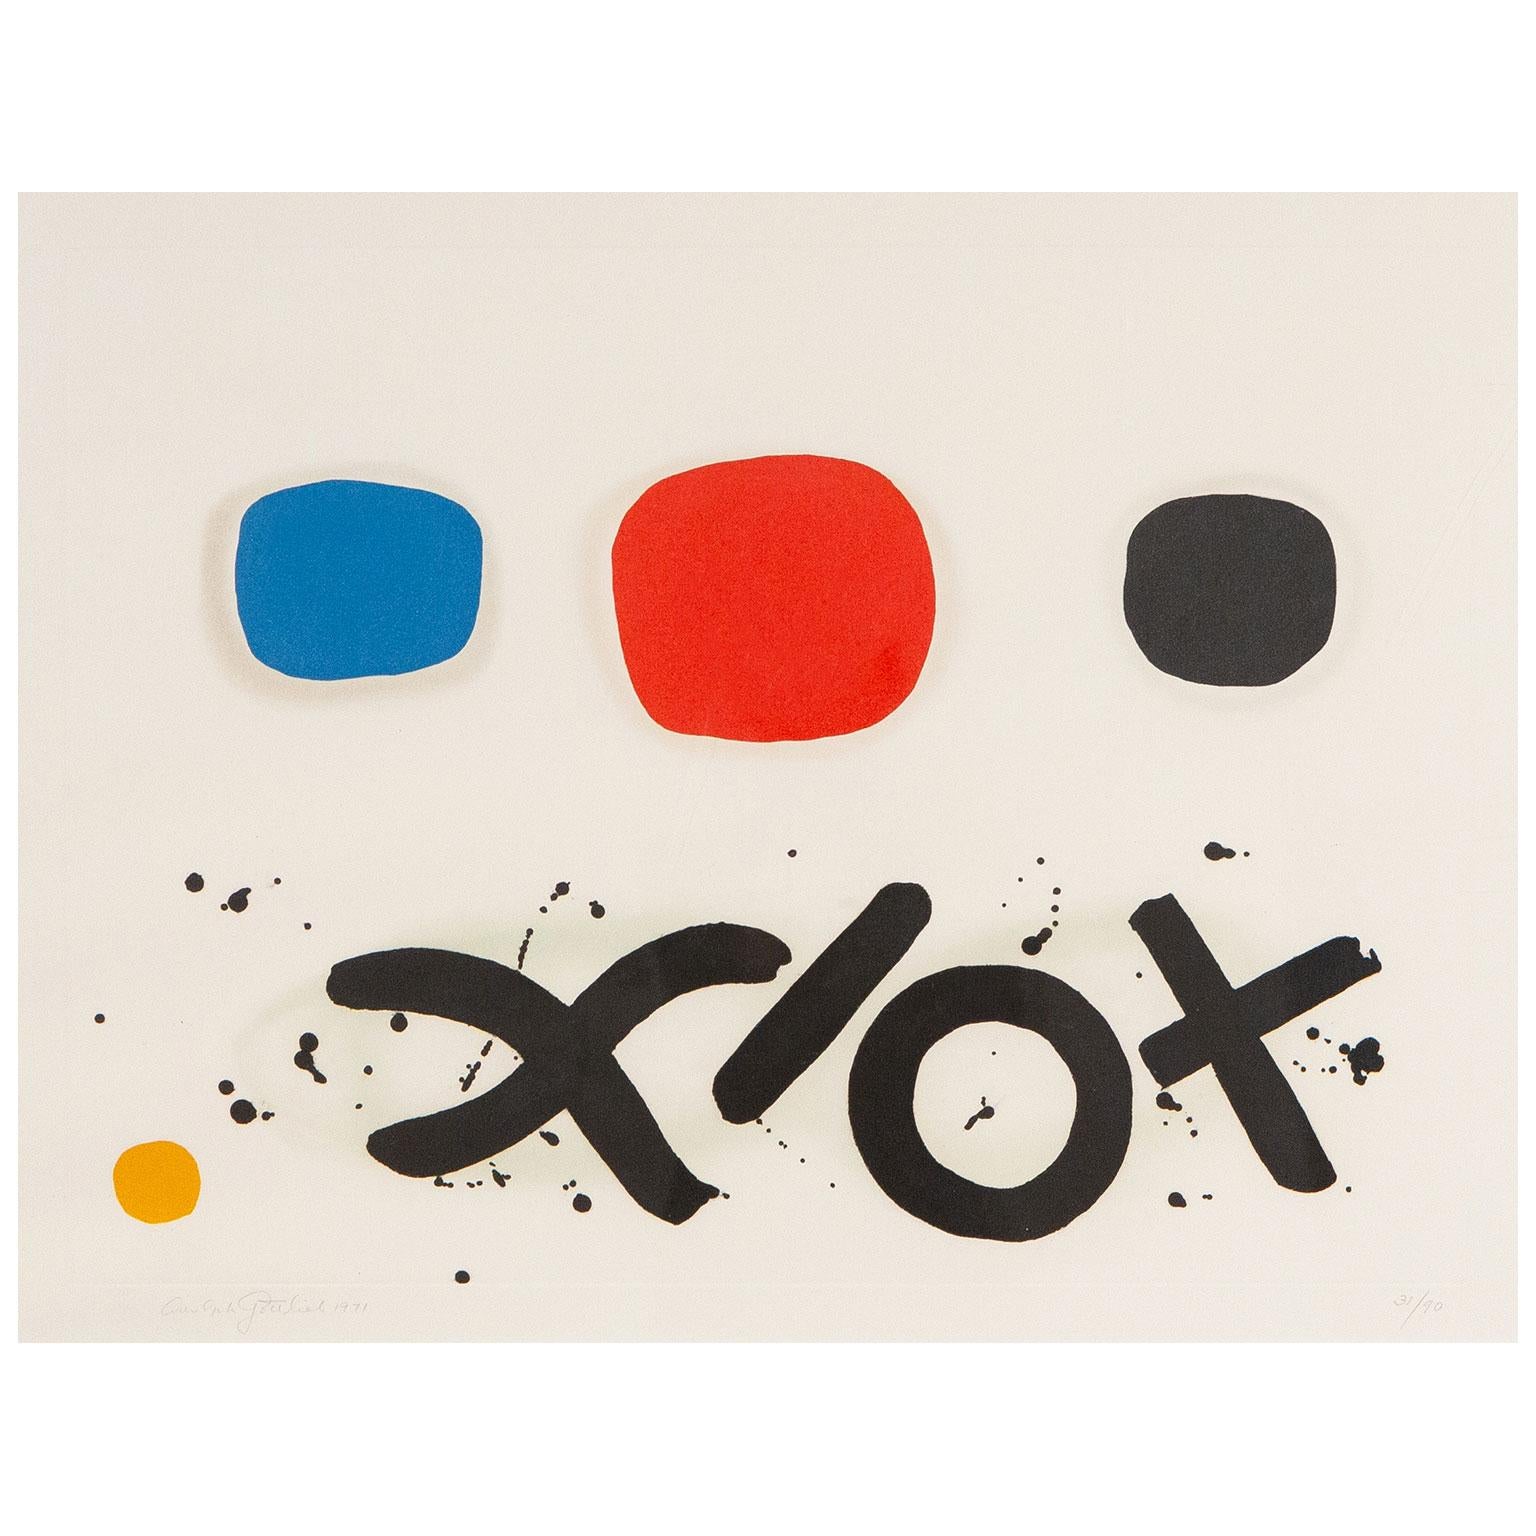 Imaginary Landscape I - Print by Adolph Gottlieb